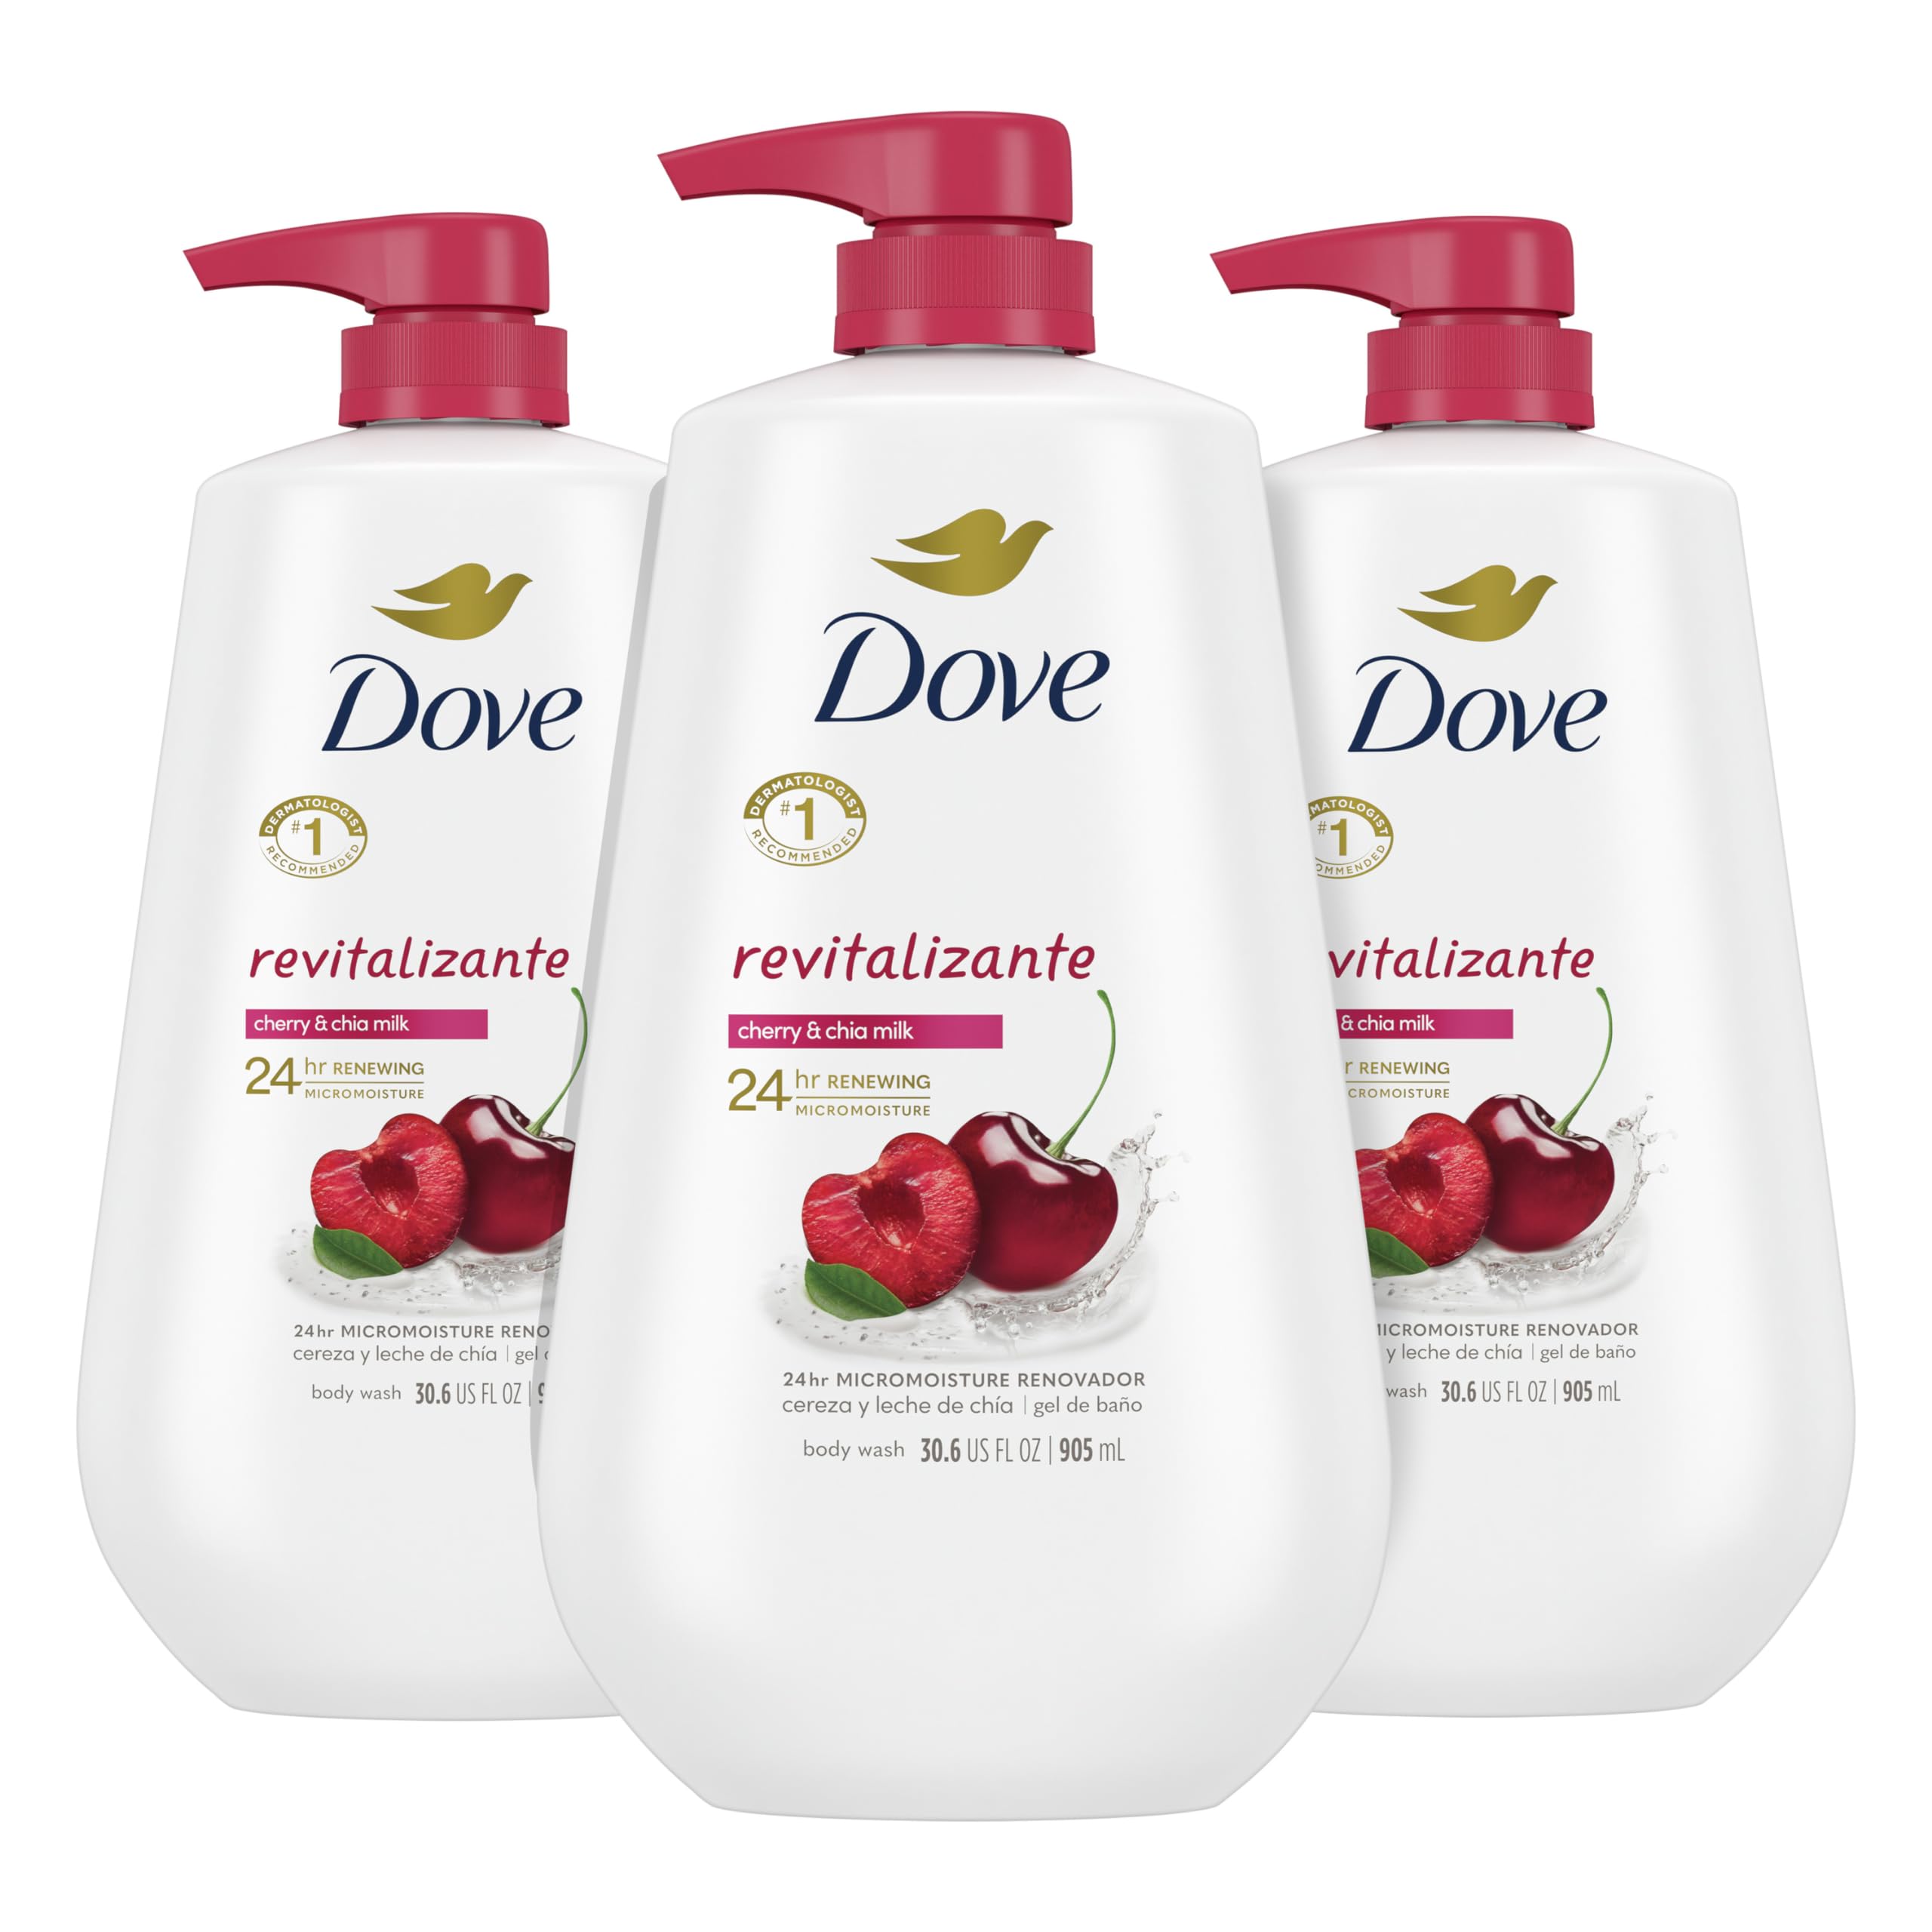 Dove Body Wash with Pump,Revitalizante Cherry & Chia Milk, 3 Count, for Renewed Healthy Looking Skin, Moisturizing Gentle Skin Cleanser with 24hr Renewing MicroMoisture, 30.6 oz